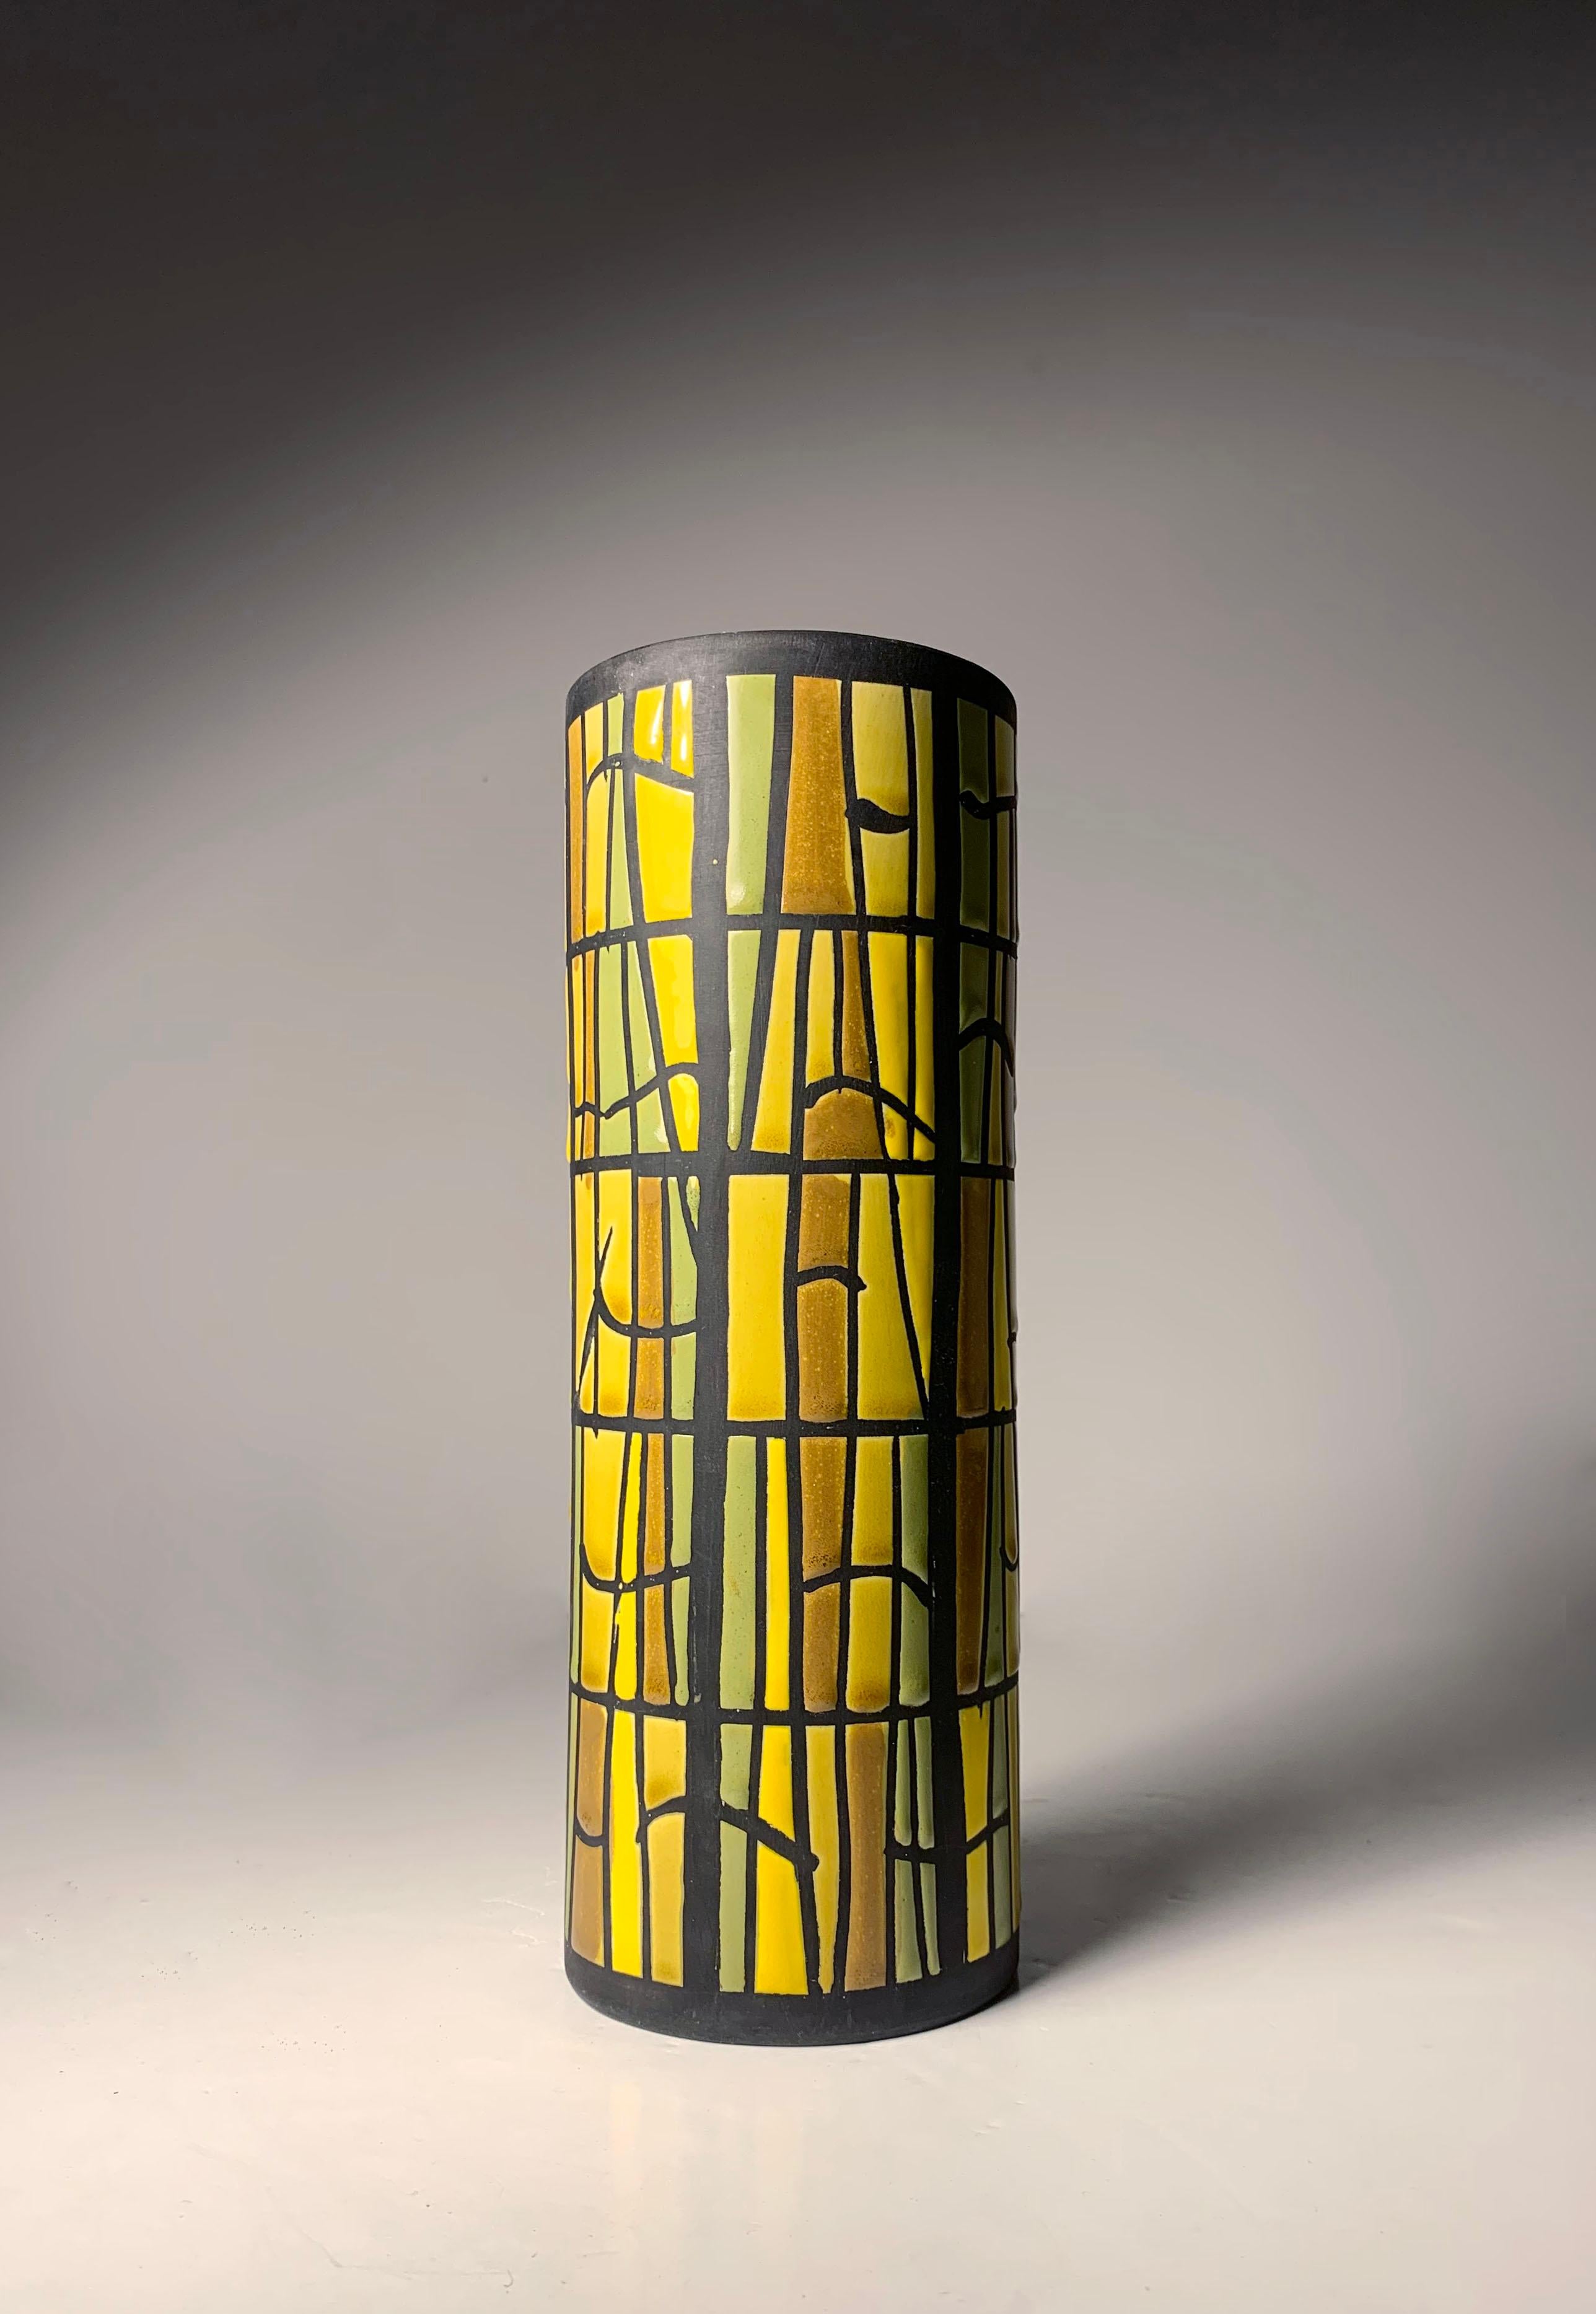 Vintage Italian Ceramic Vase by Alvino Bagni for Bitossi / Raymor. A design simulating that of a stained glass window.